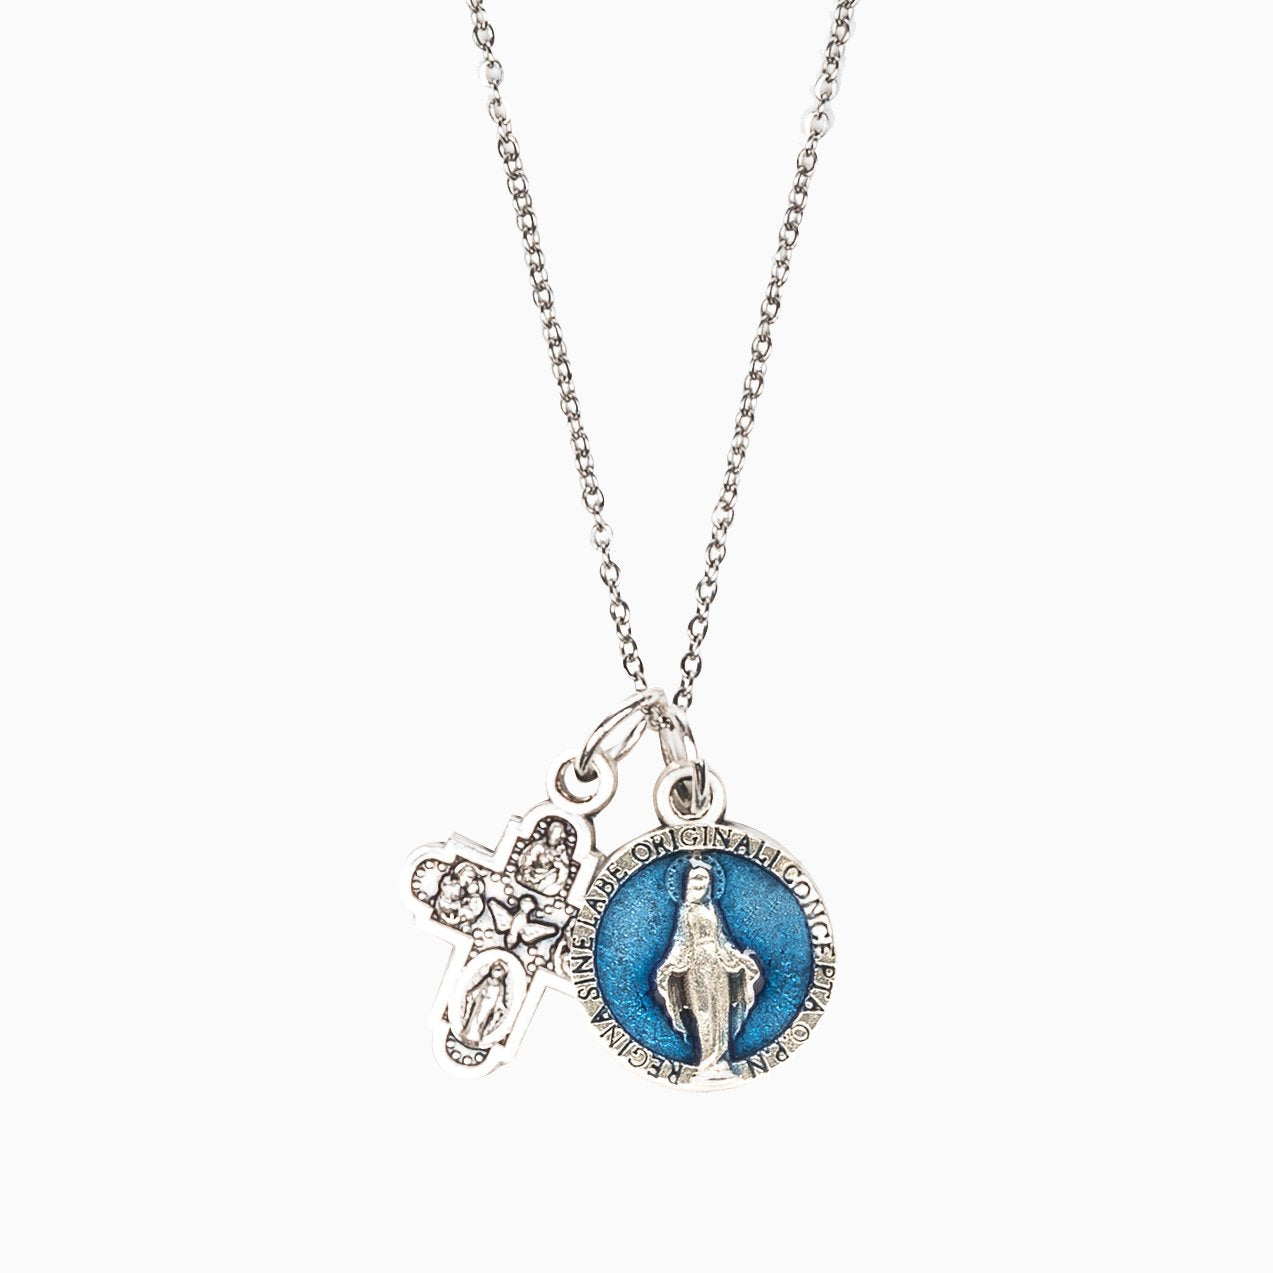 MSMH - Vintage Blessing Lineage of Love Necklace